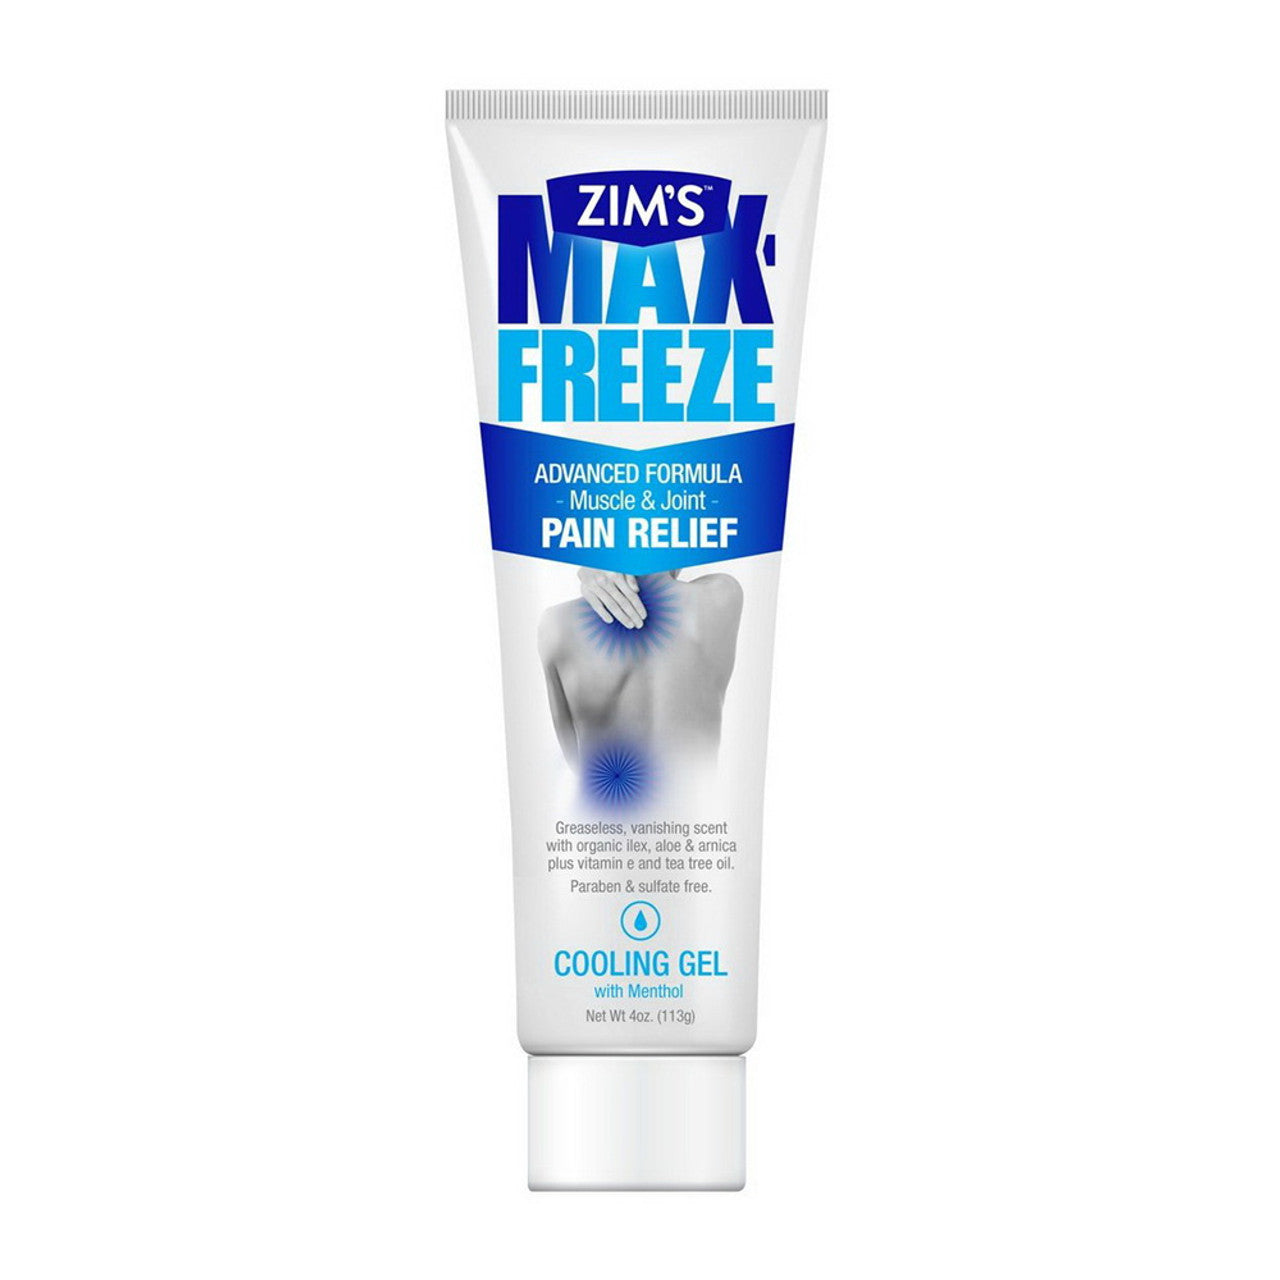 Zims Max Freeze Advanced Muscle and Joint Relief Cooling Gel, 4 Oz